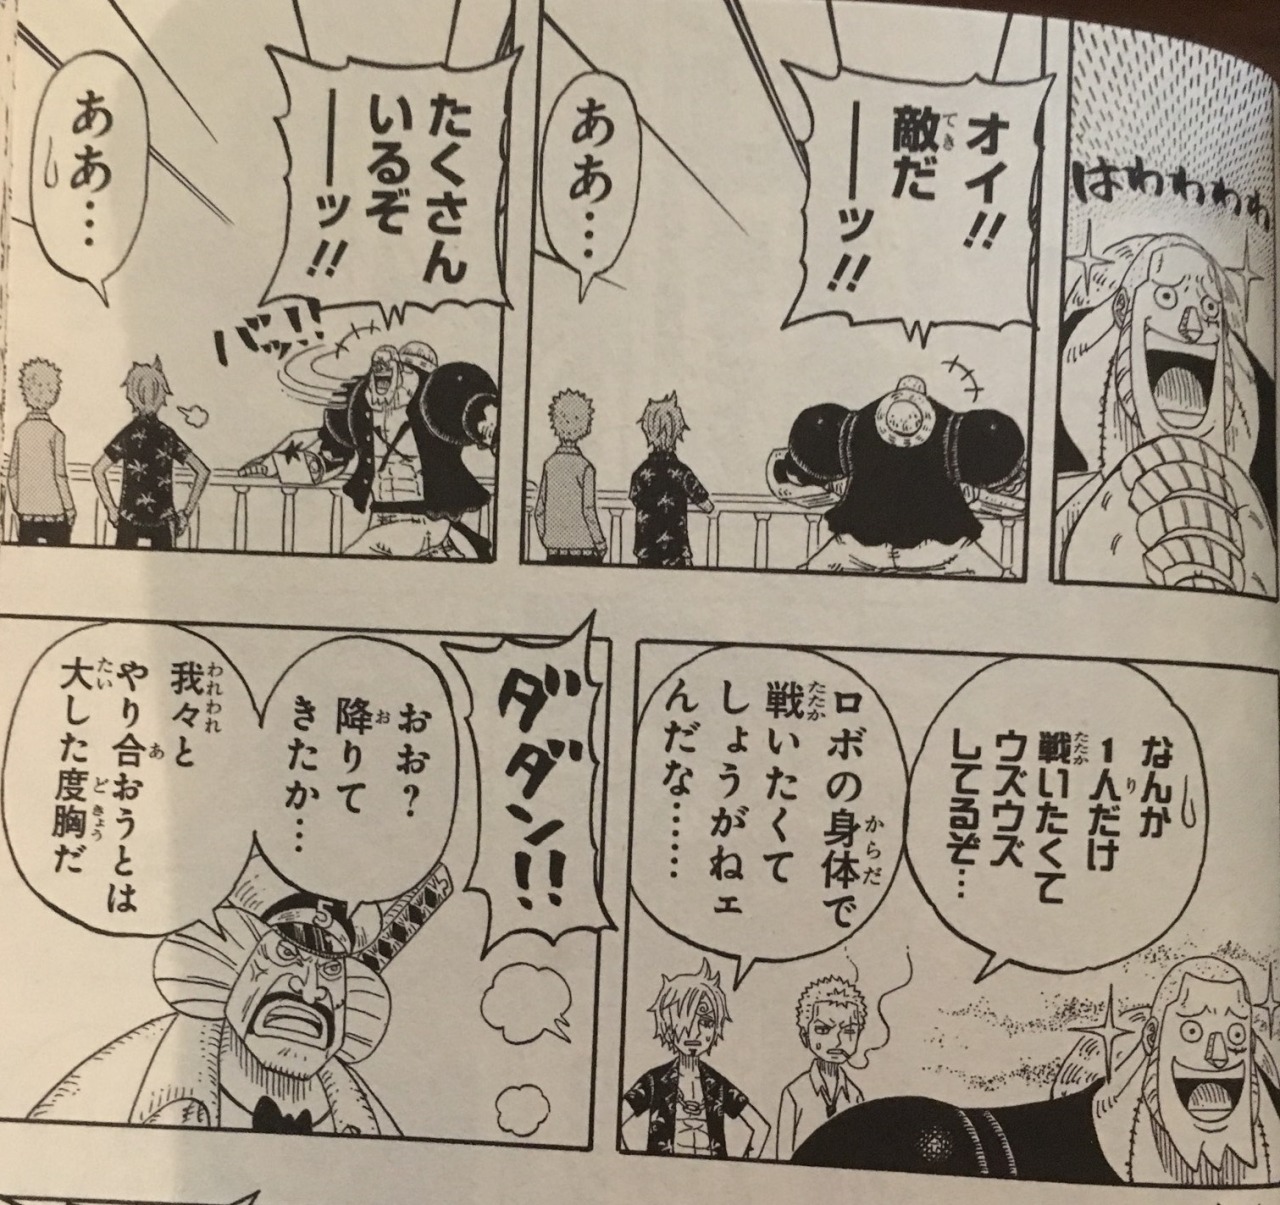 Translation in progress — ONE PIECE PARTY Vol.3, Fifth story Part 3/5